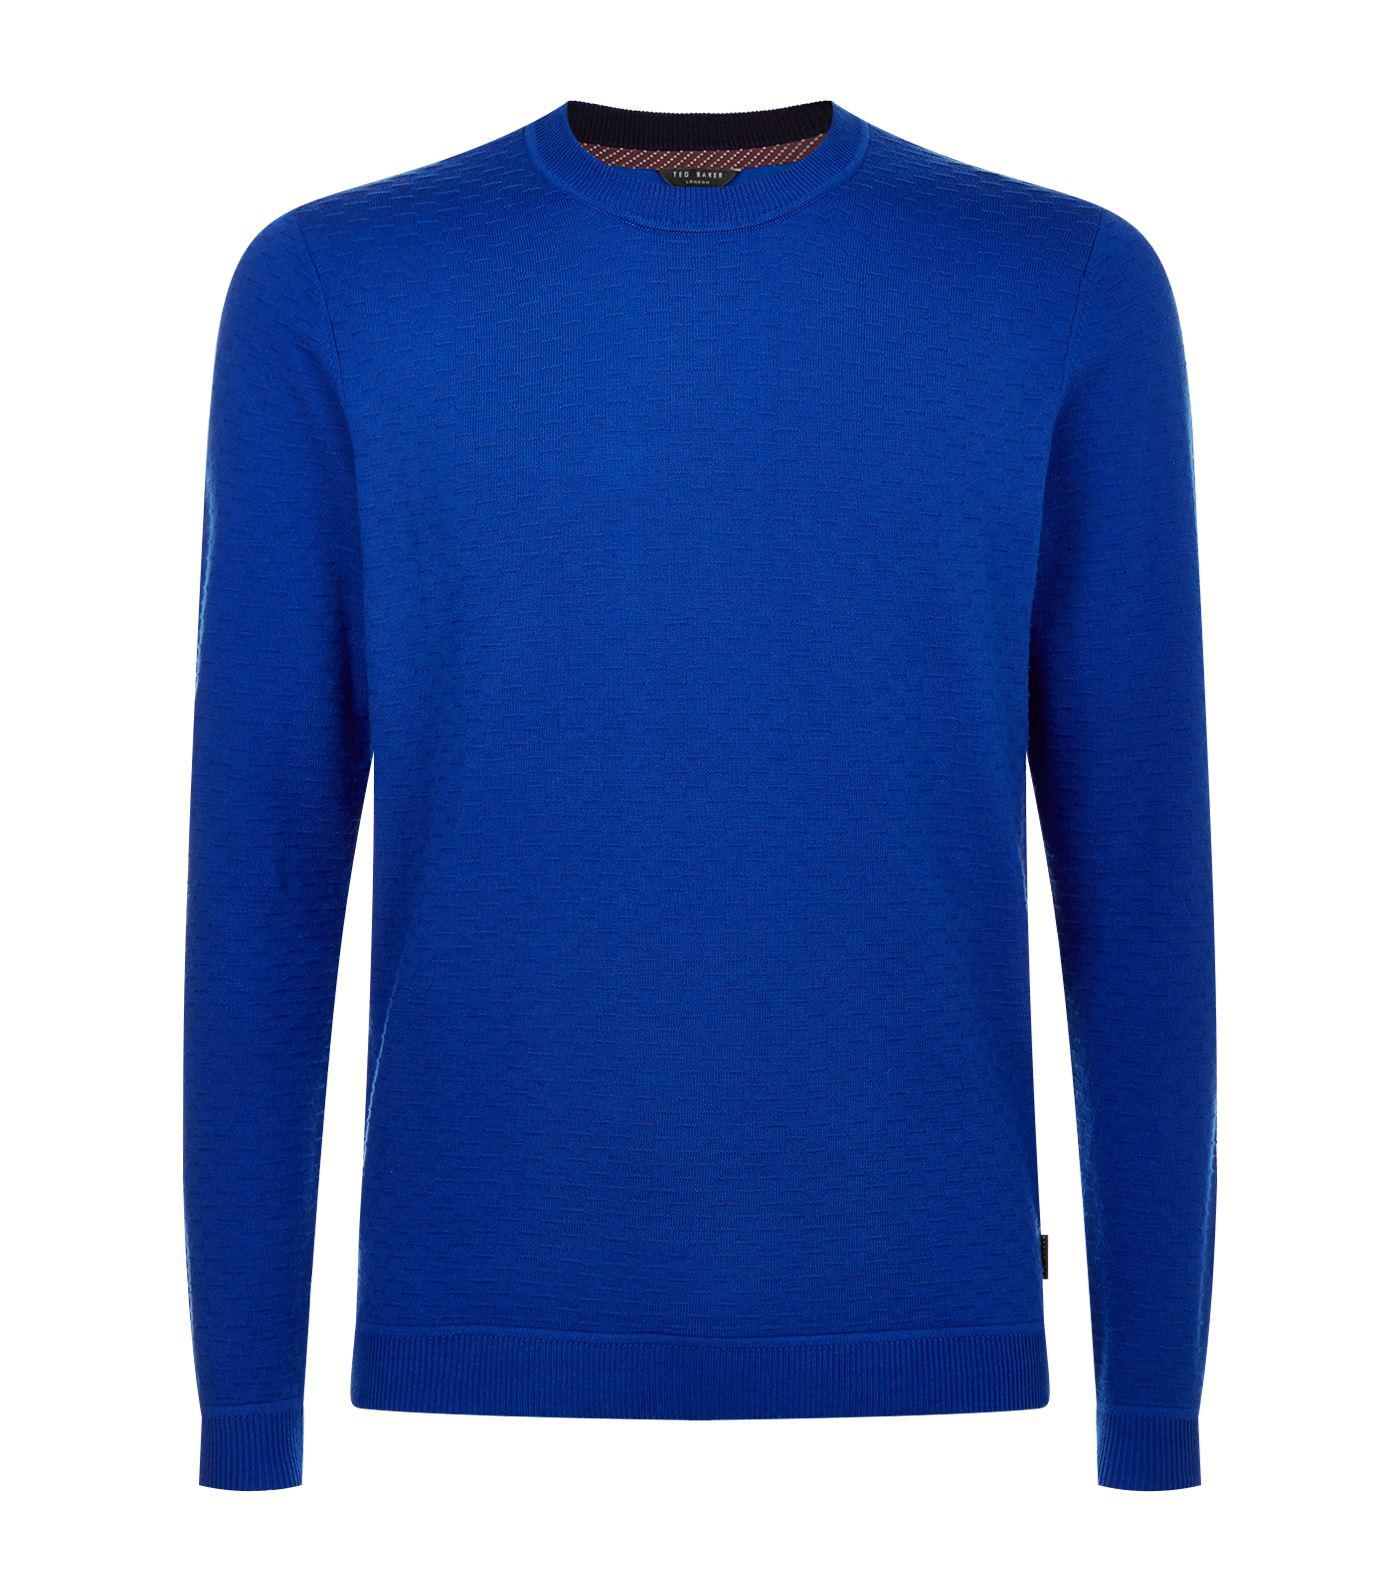 Lyst - Ted Baker Rettop Crew Neck Sweater in Blue for Men